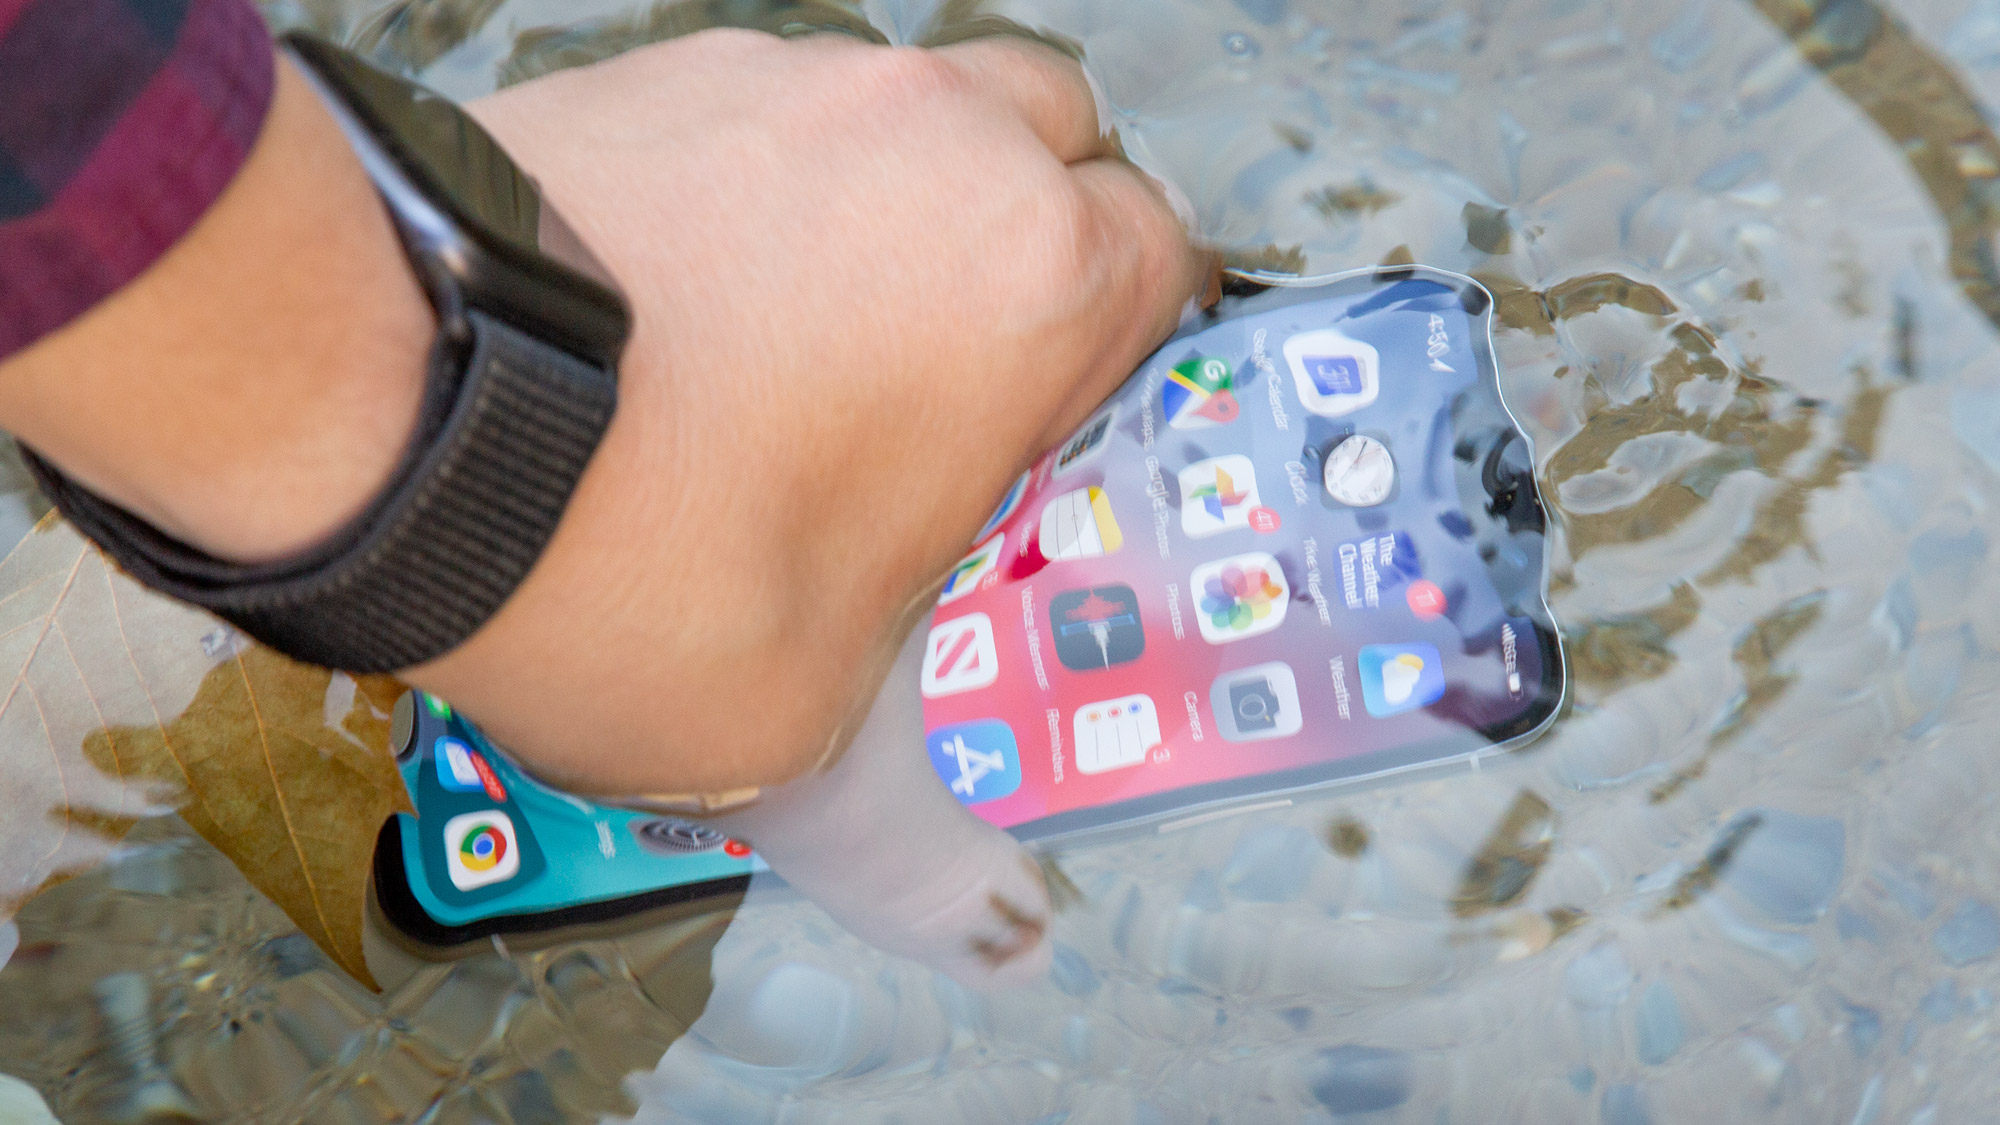 A hand dipping an iPhone in water to test its water resistance capabilities